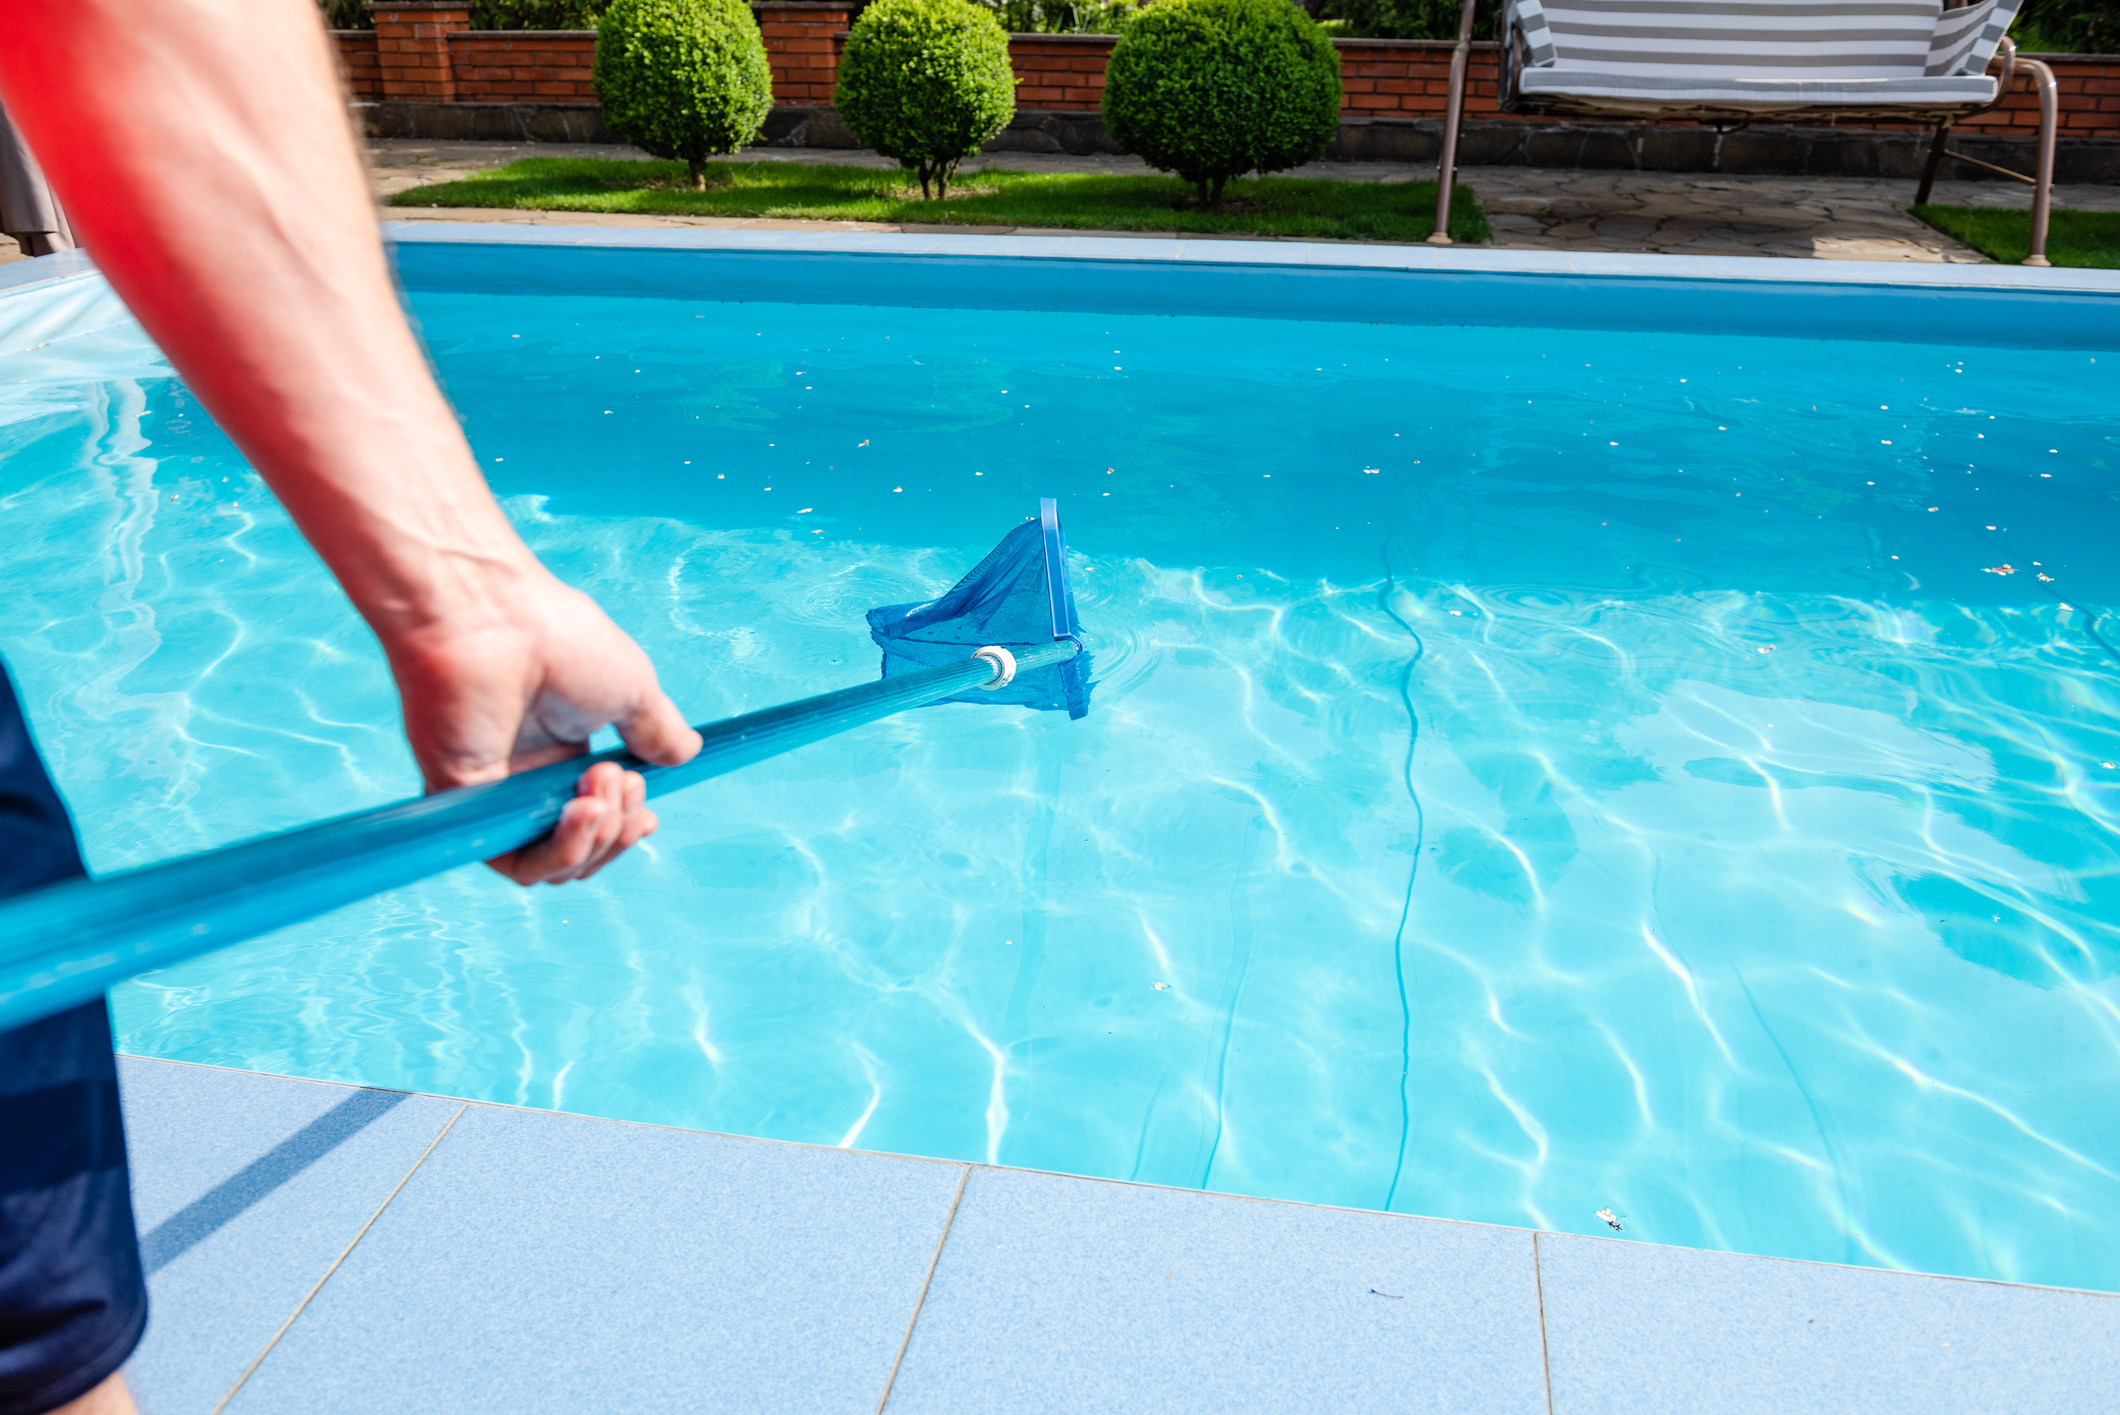 Ask these questions when hiring a pool contractor